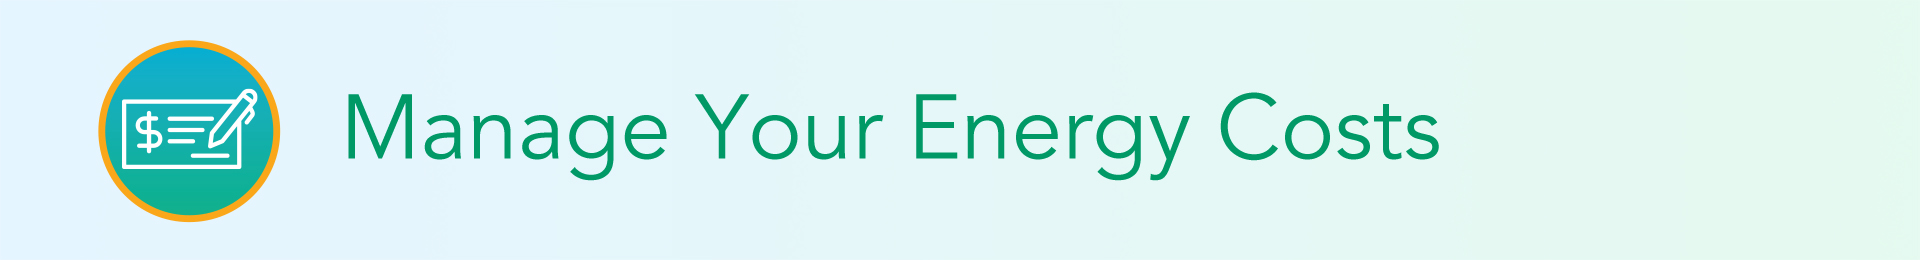 Manage Your Energy Costs